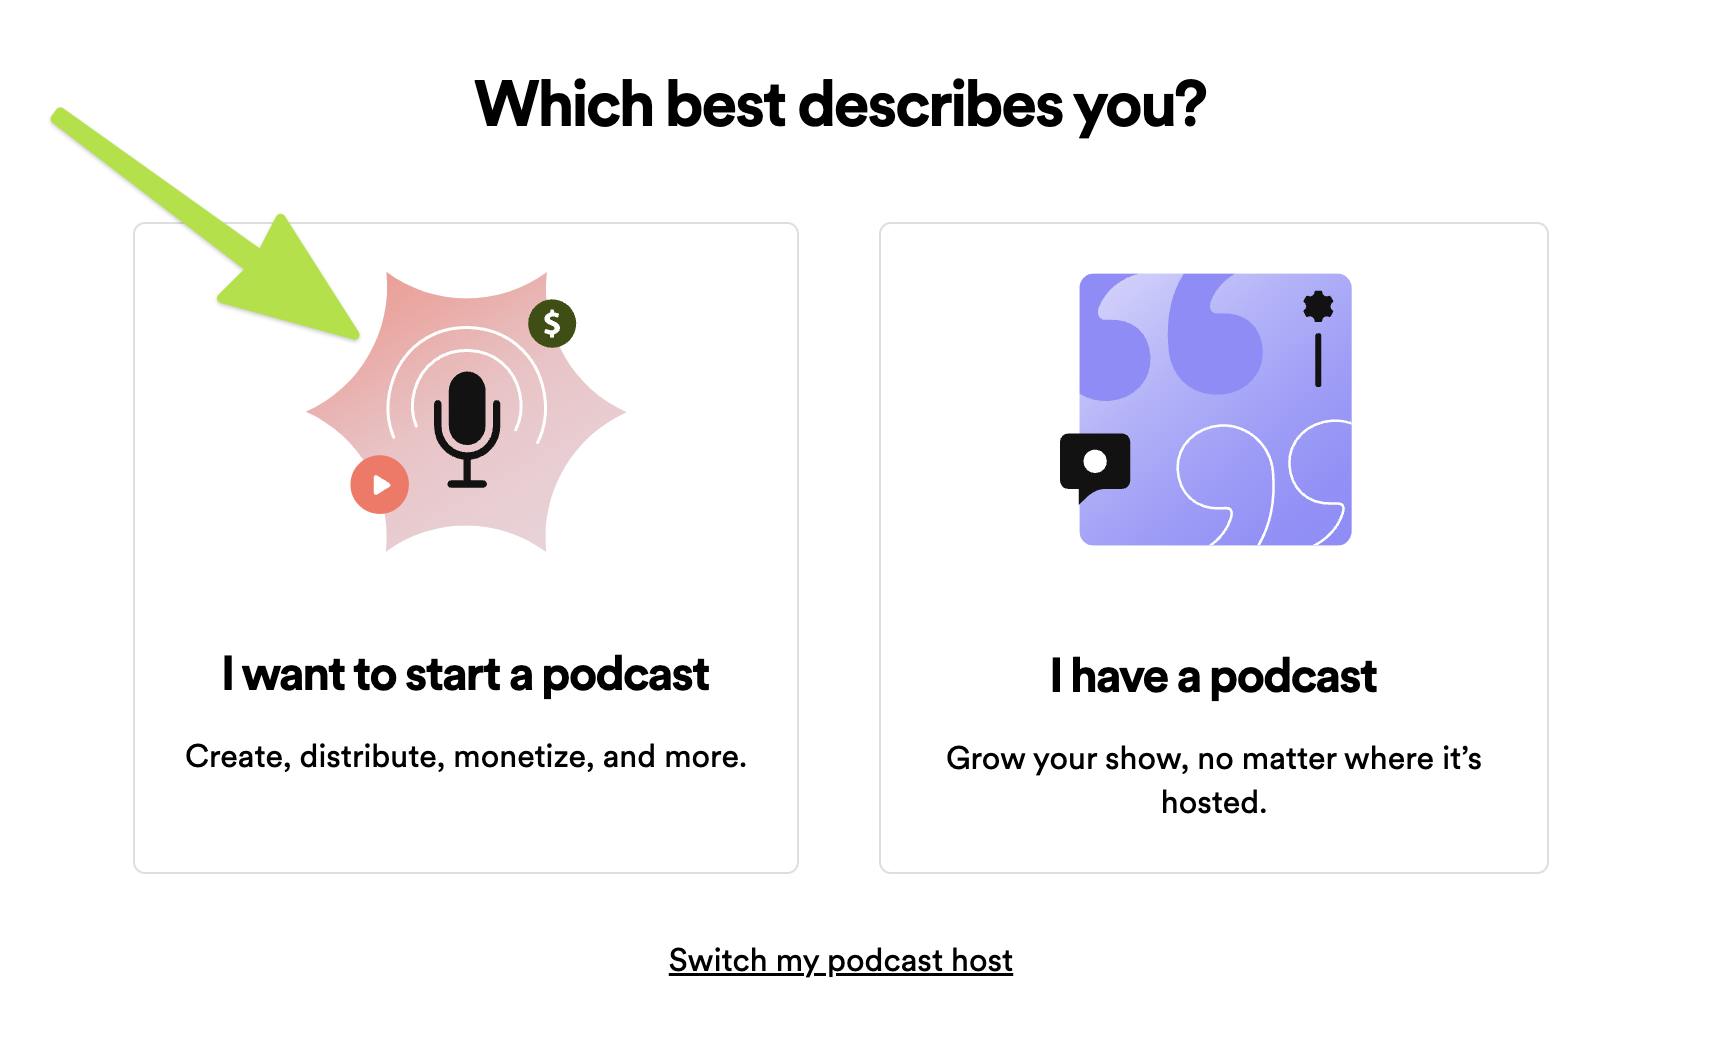 Spotify to Add User Ratings to Podcasts